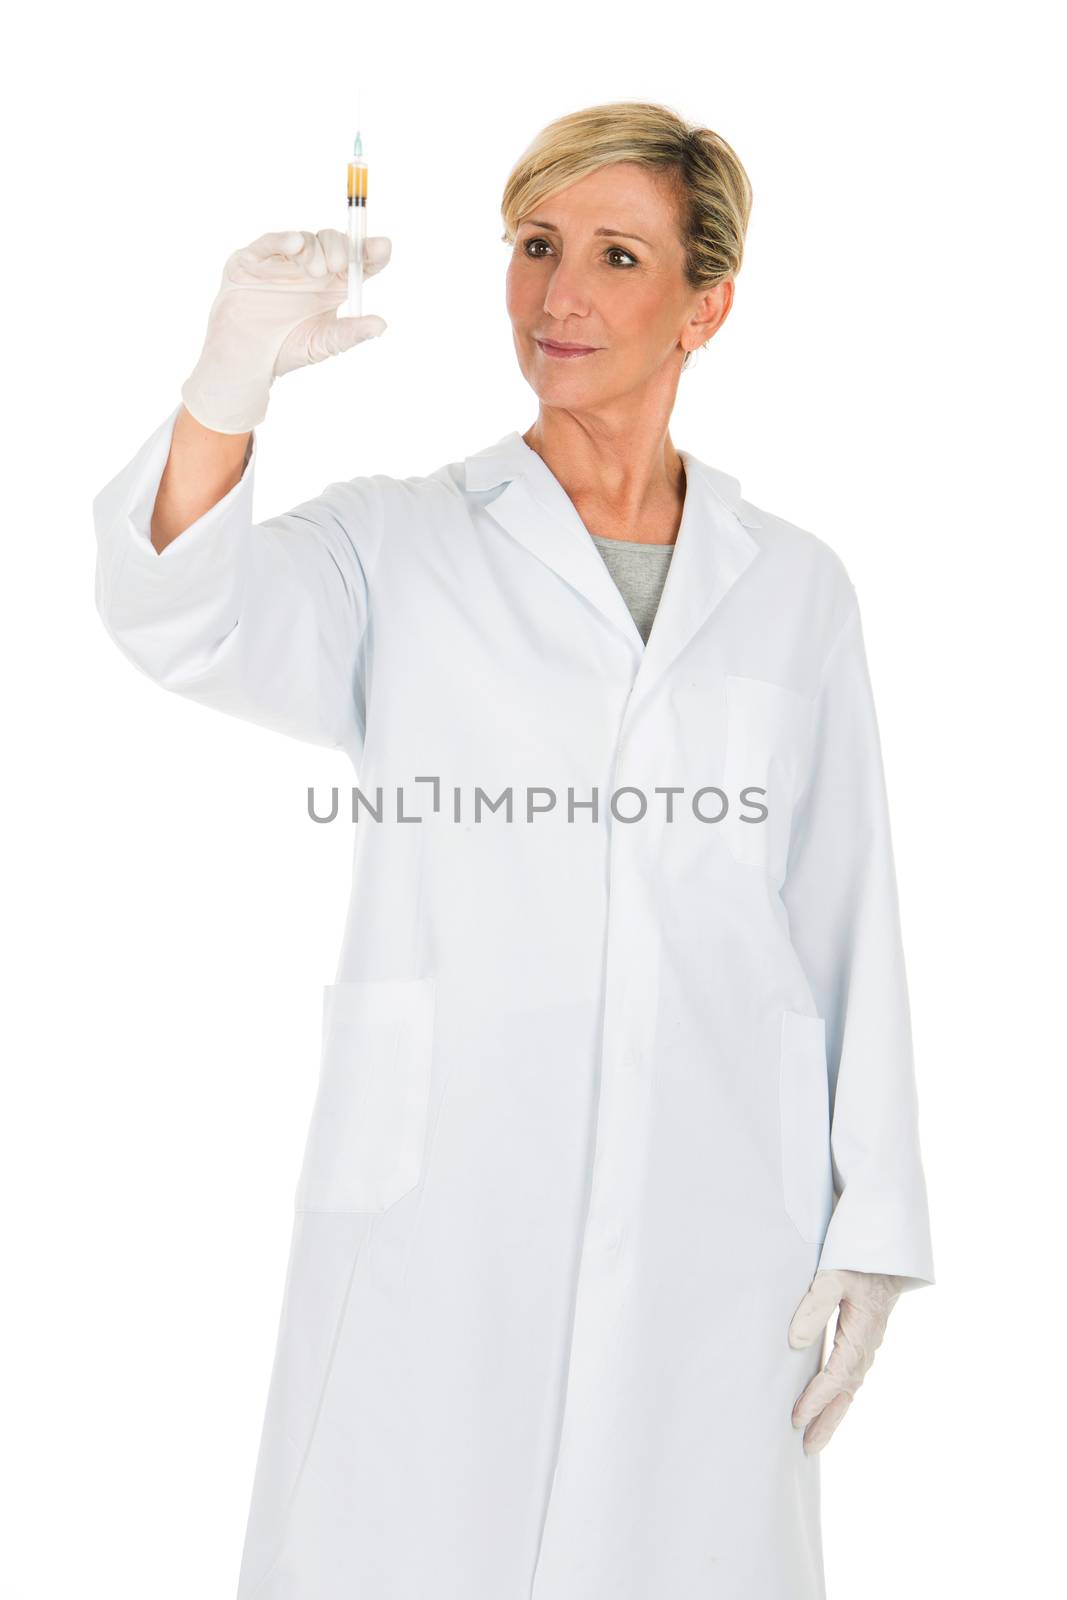 middle age woman doctor with syringe by Flareimage